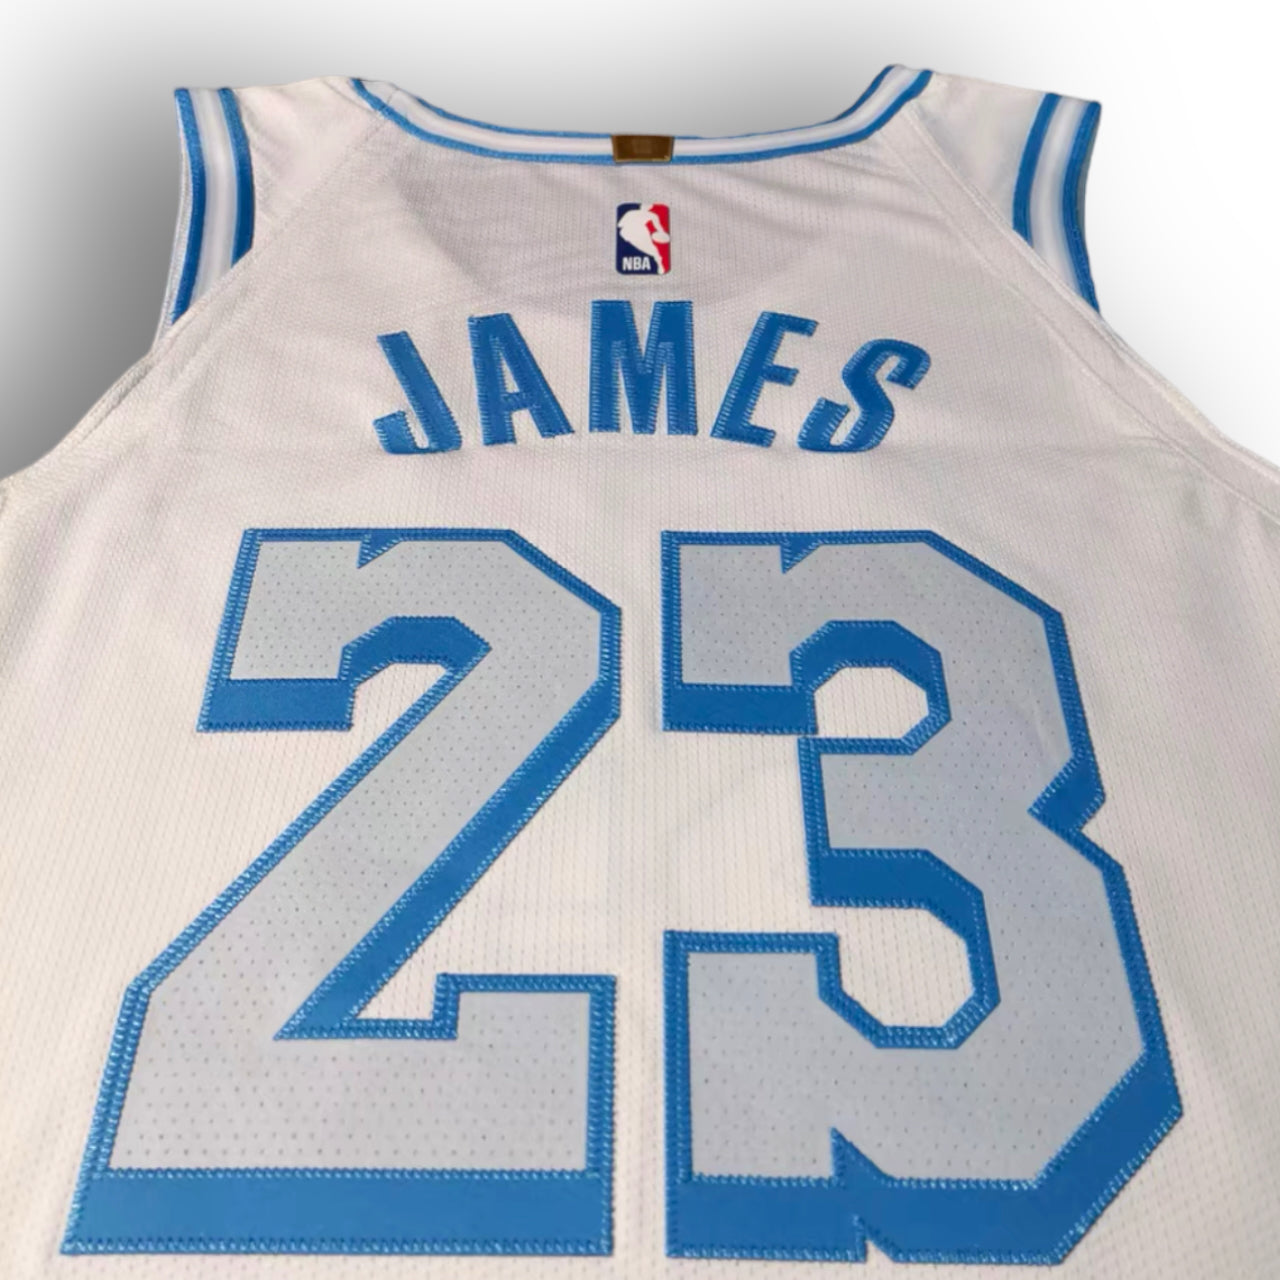 LeBron James Los Angeles Lakers 2020-2021 City Edition Nike Authentic Jersey - White/Blue #23 - Hoop Jersey Store